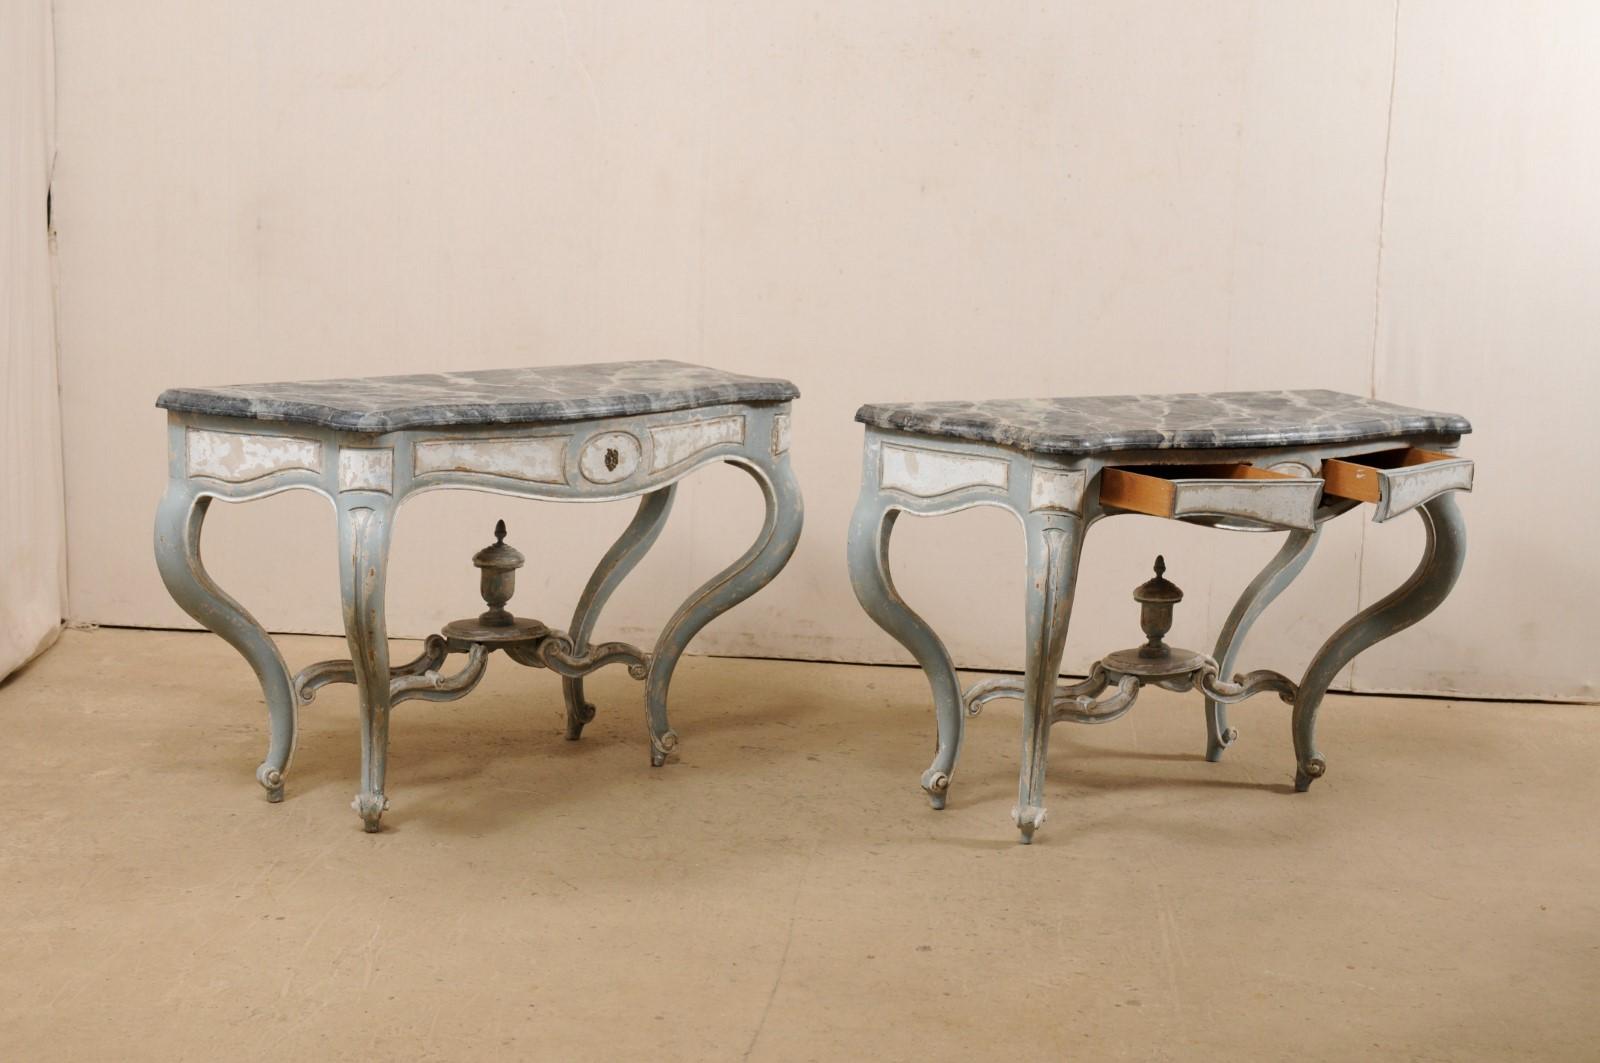 A French pair of carved and painted wood console tables, with faux-marble tops, from early 20th century. This antique pair of tables from France feature an oblong shaped top with flattened backside, curved sides and serpentine shaped front. The